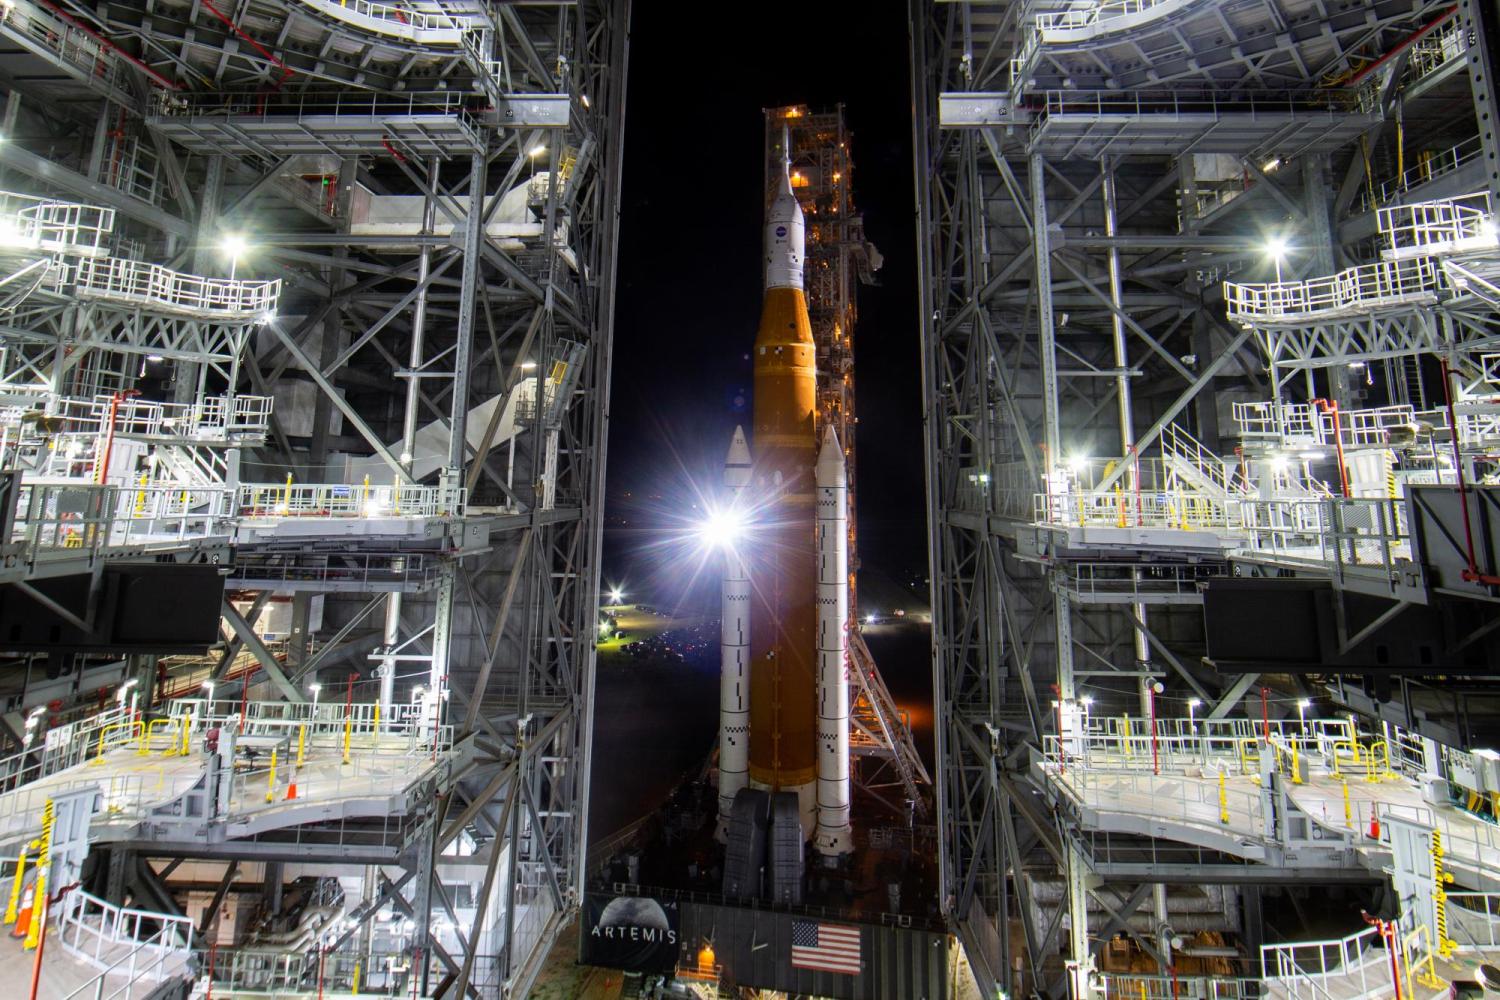 NASA's Space Launch System rocket rolls out of the Vehicle Assembly Building